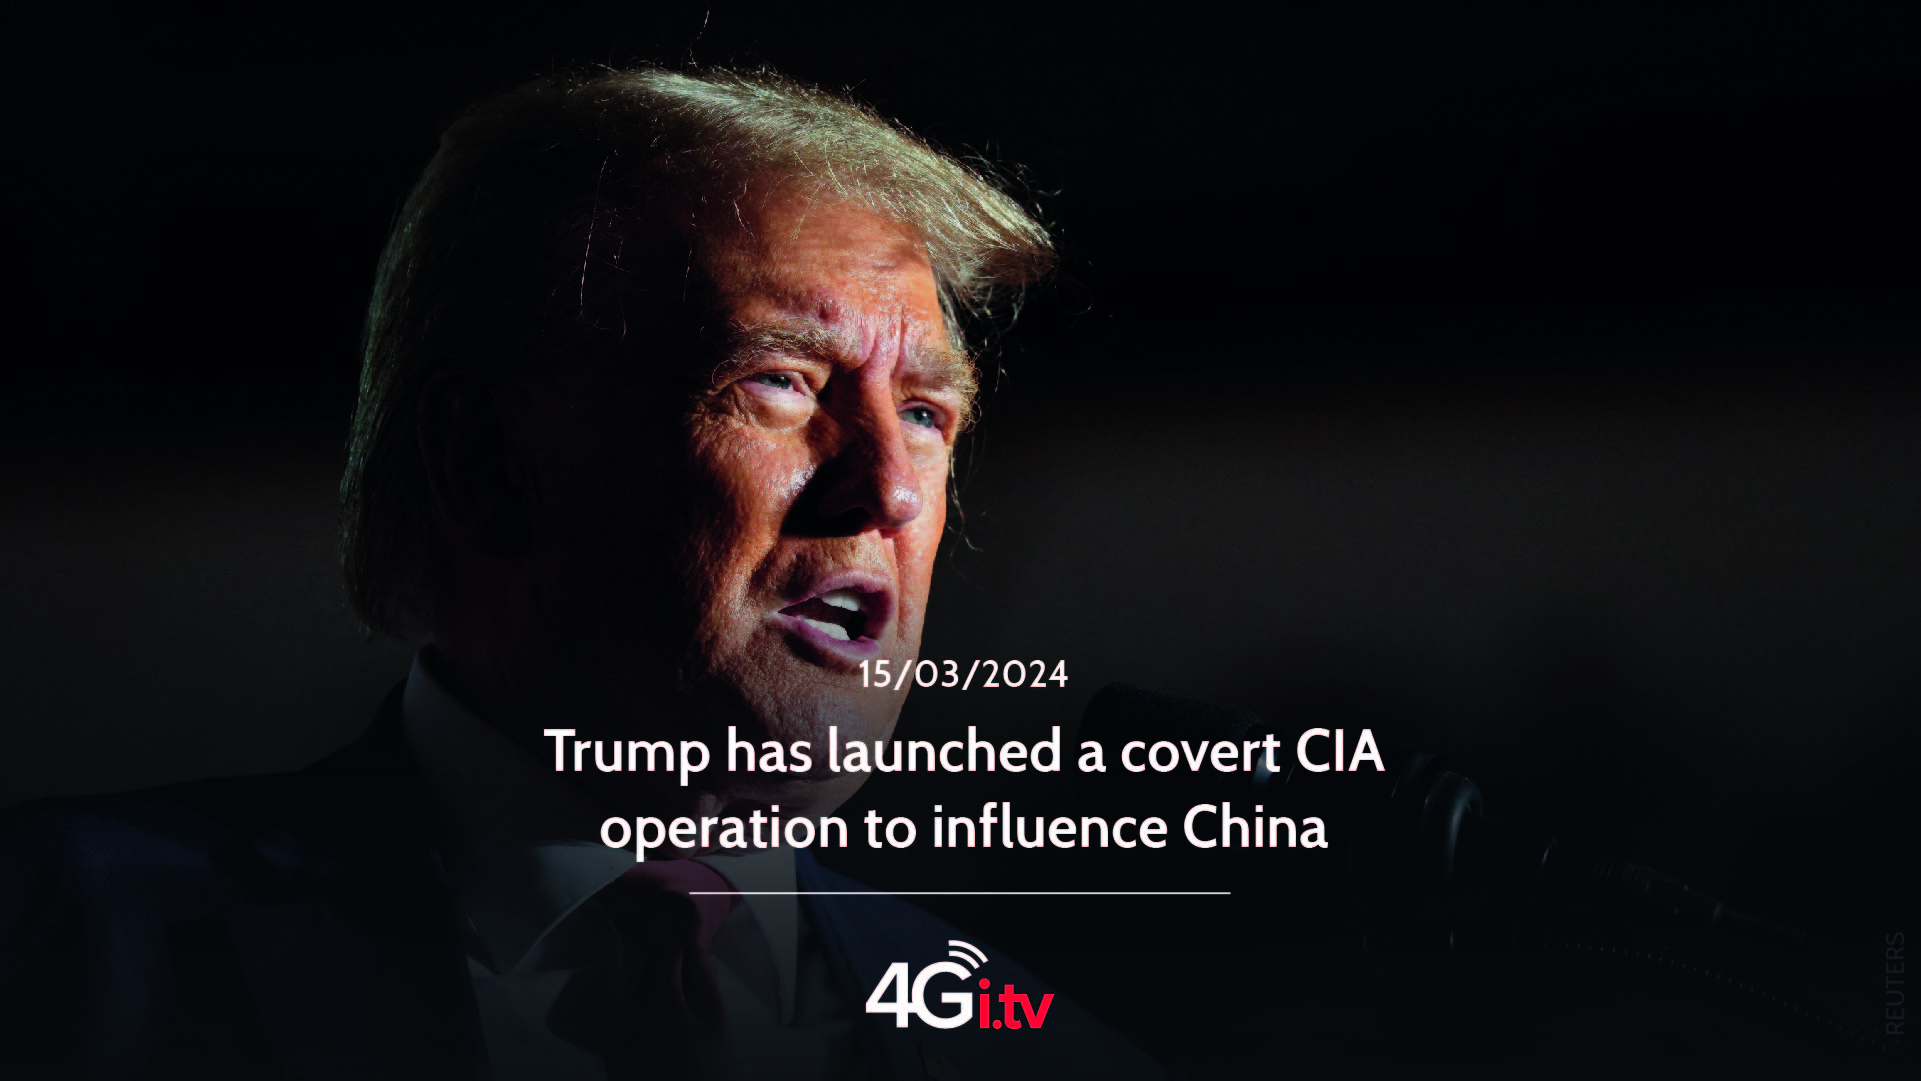 Подробнее о статье Trump launched a covert CIA operation to influence China